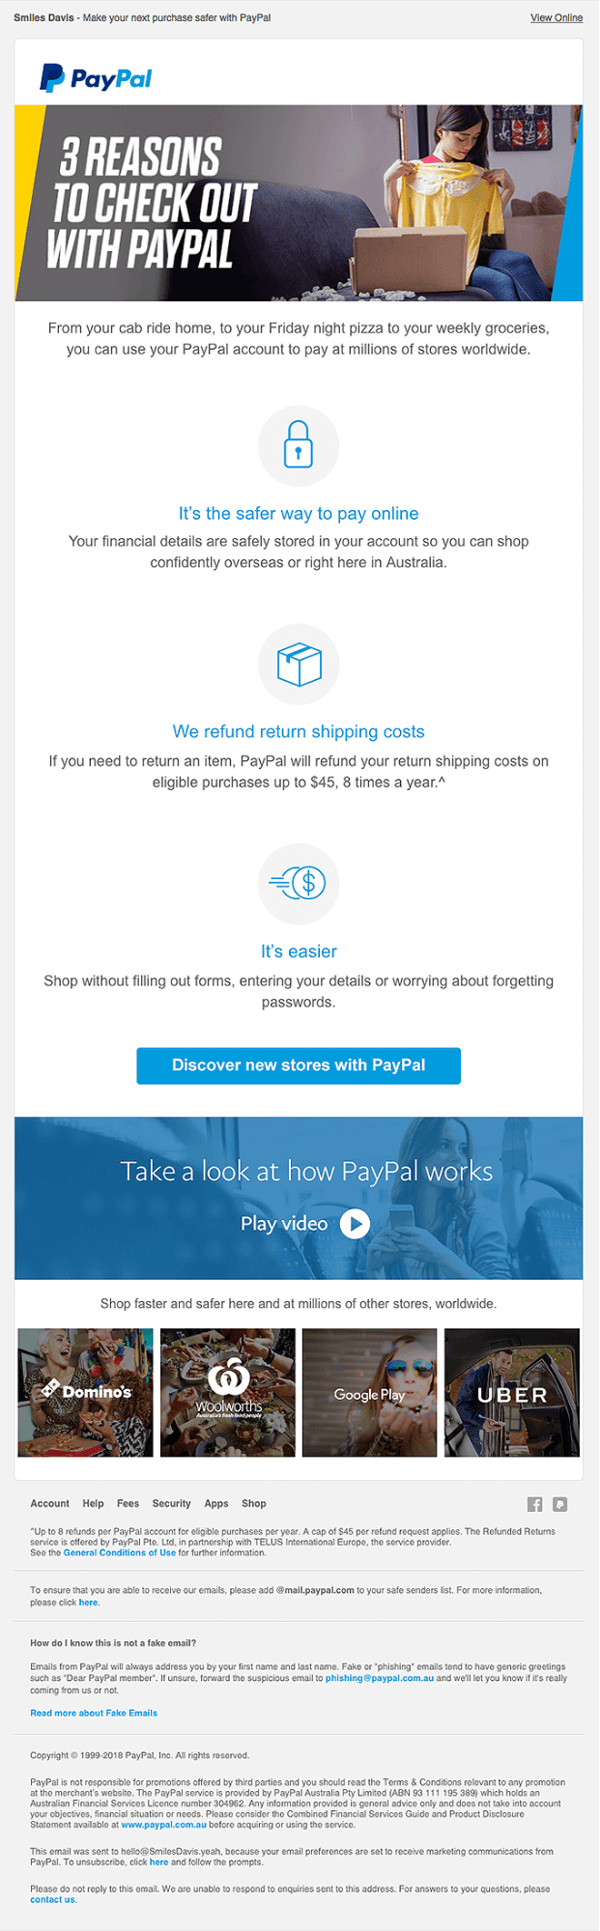 paypal-onboarding-email